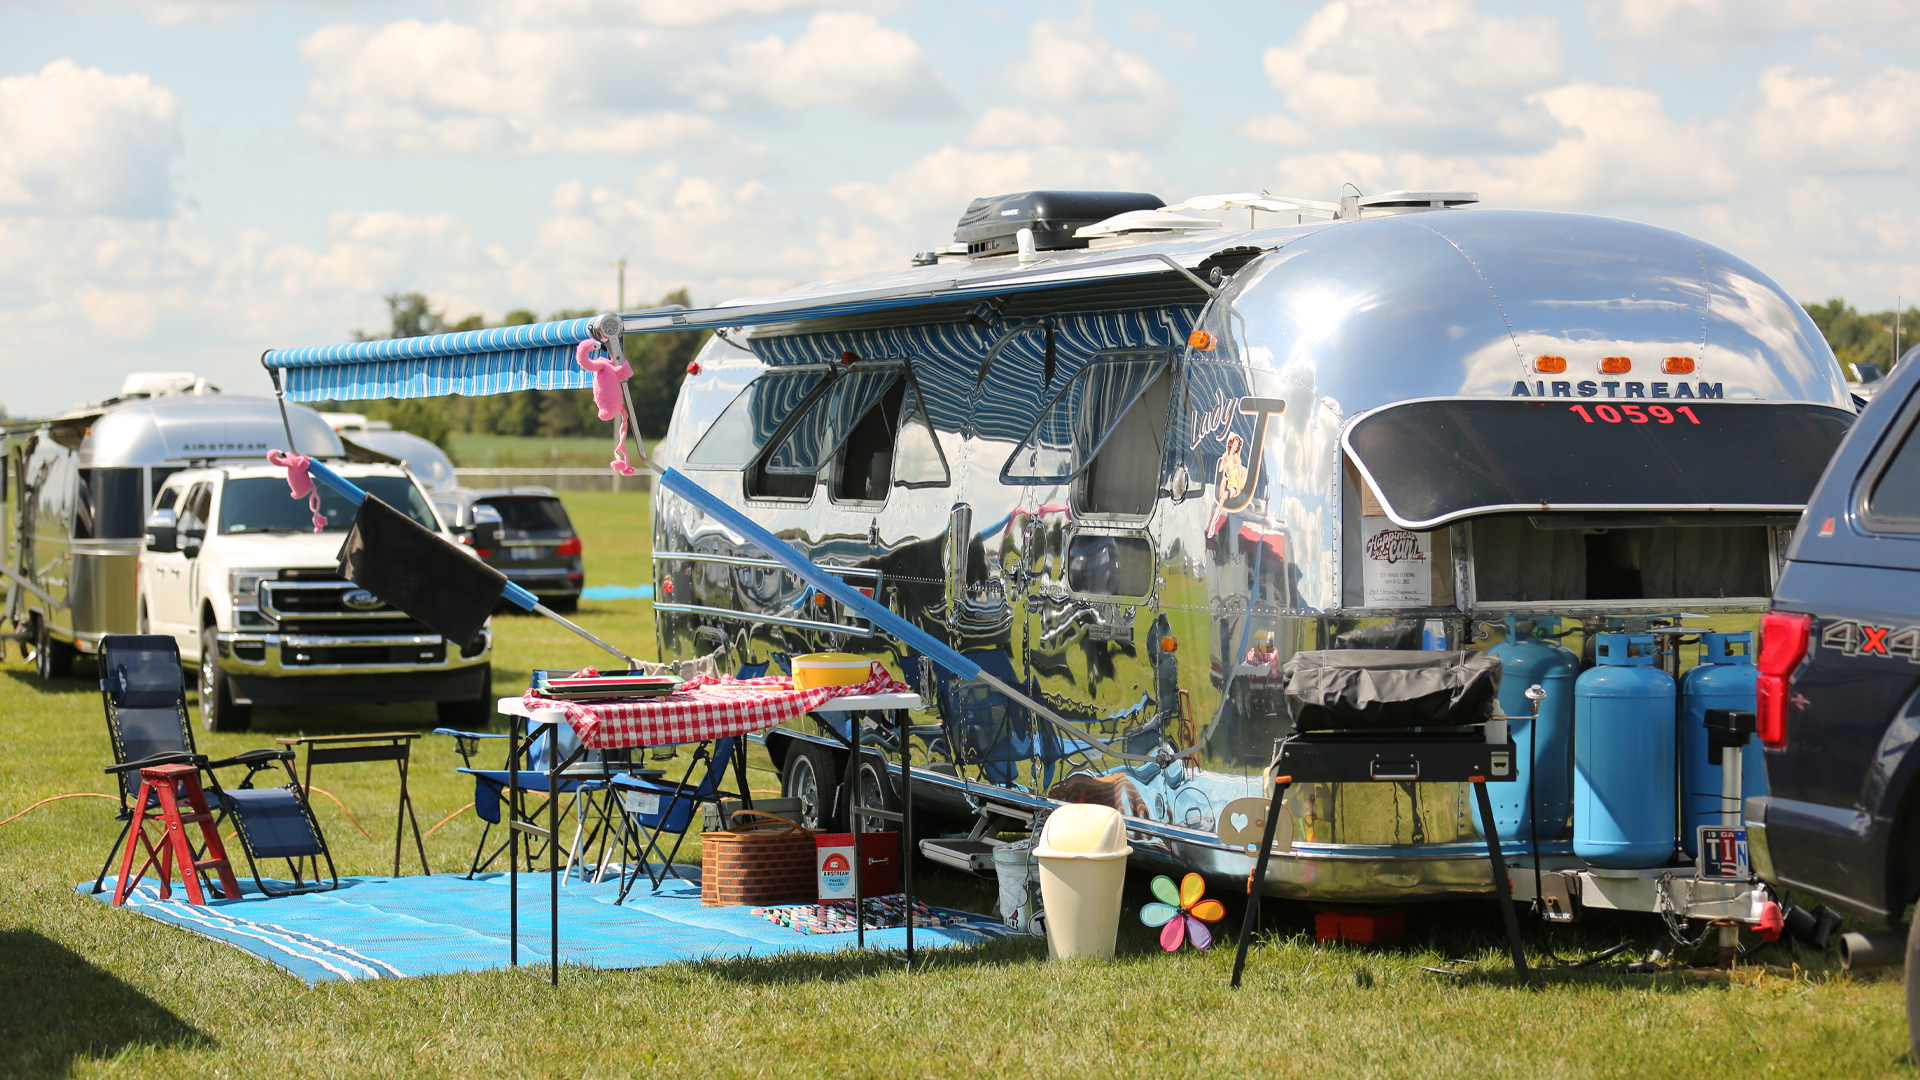 A vintage Airstream has its campsite all set up for Alumapalooza in Jackson Center, Ohio